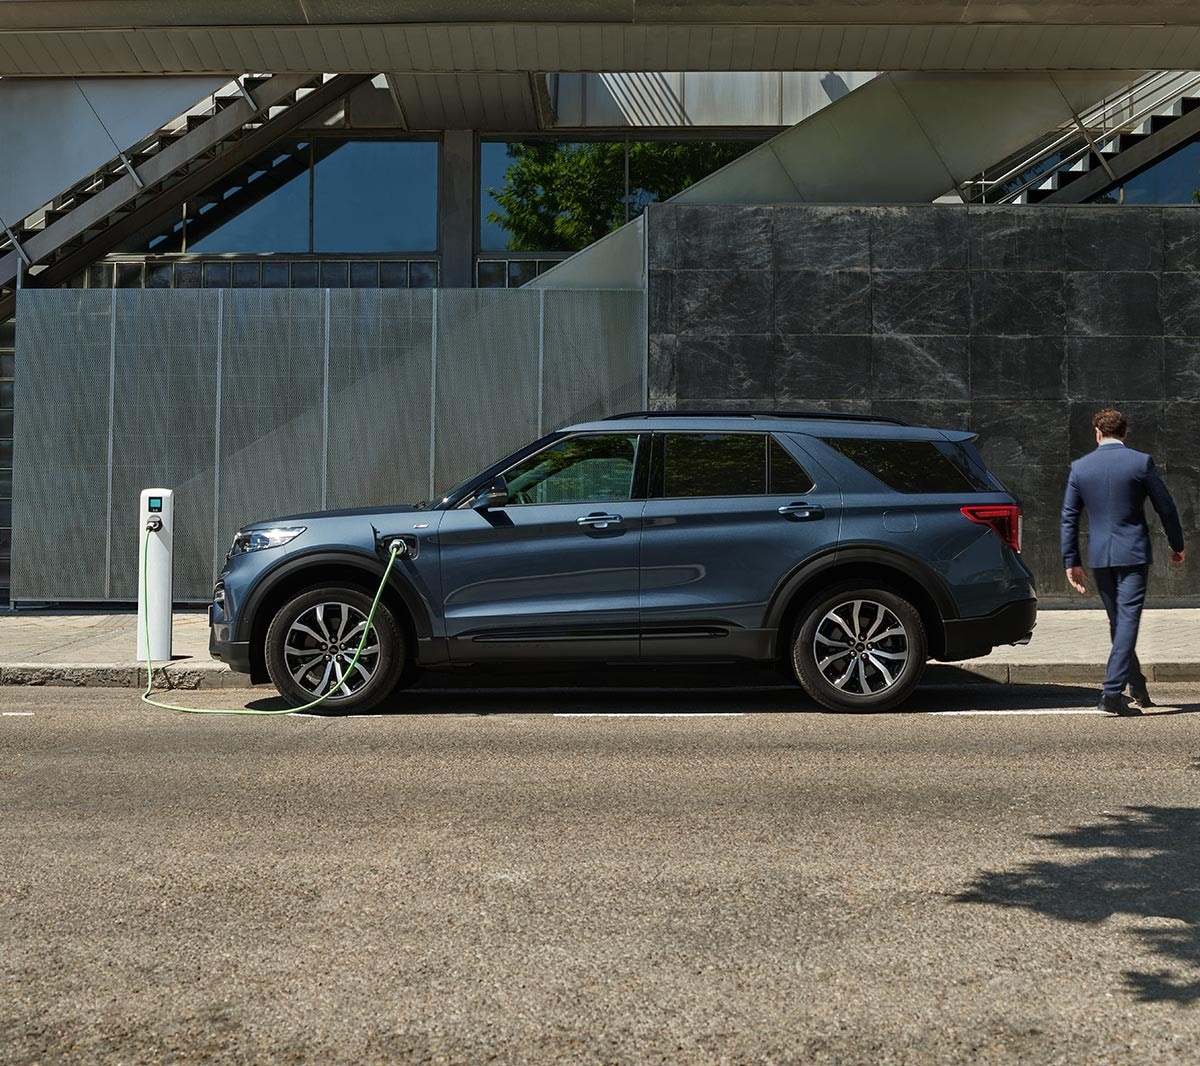 Side view of Ford Explorer PHEV parking next to the charging point with person walking around